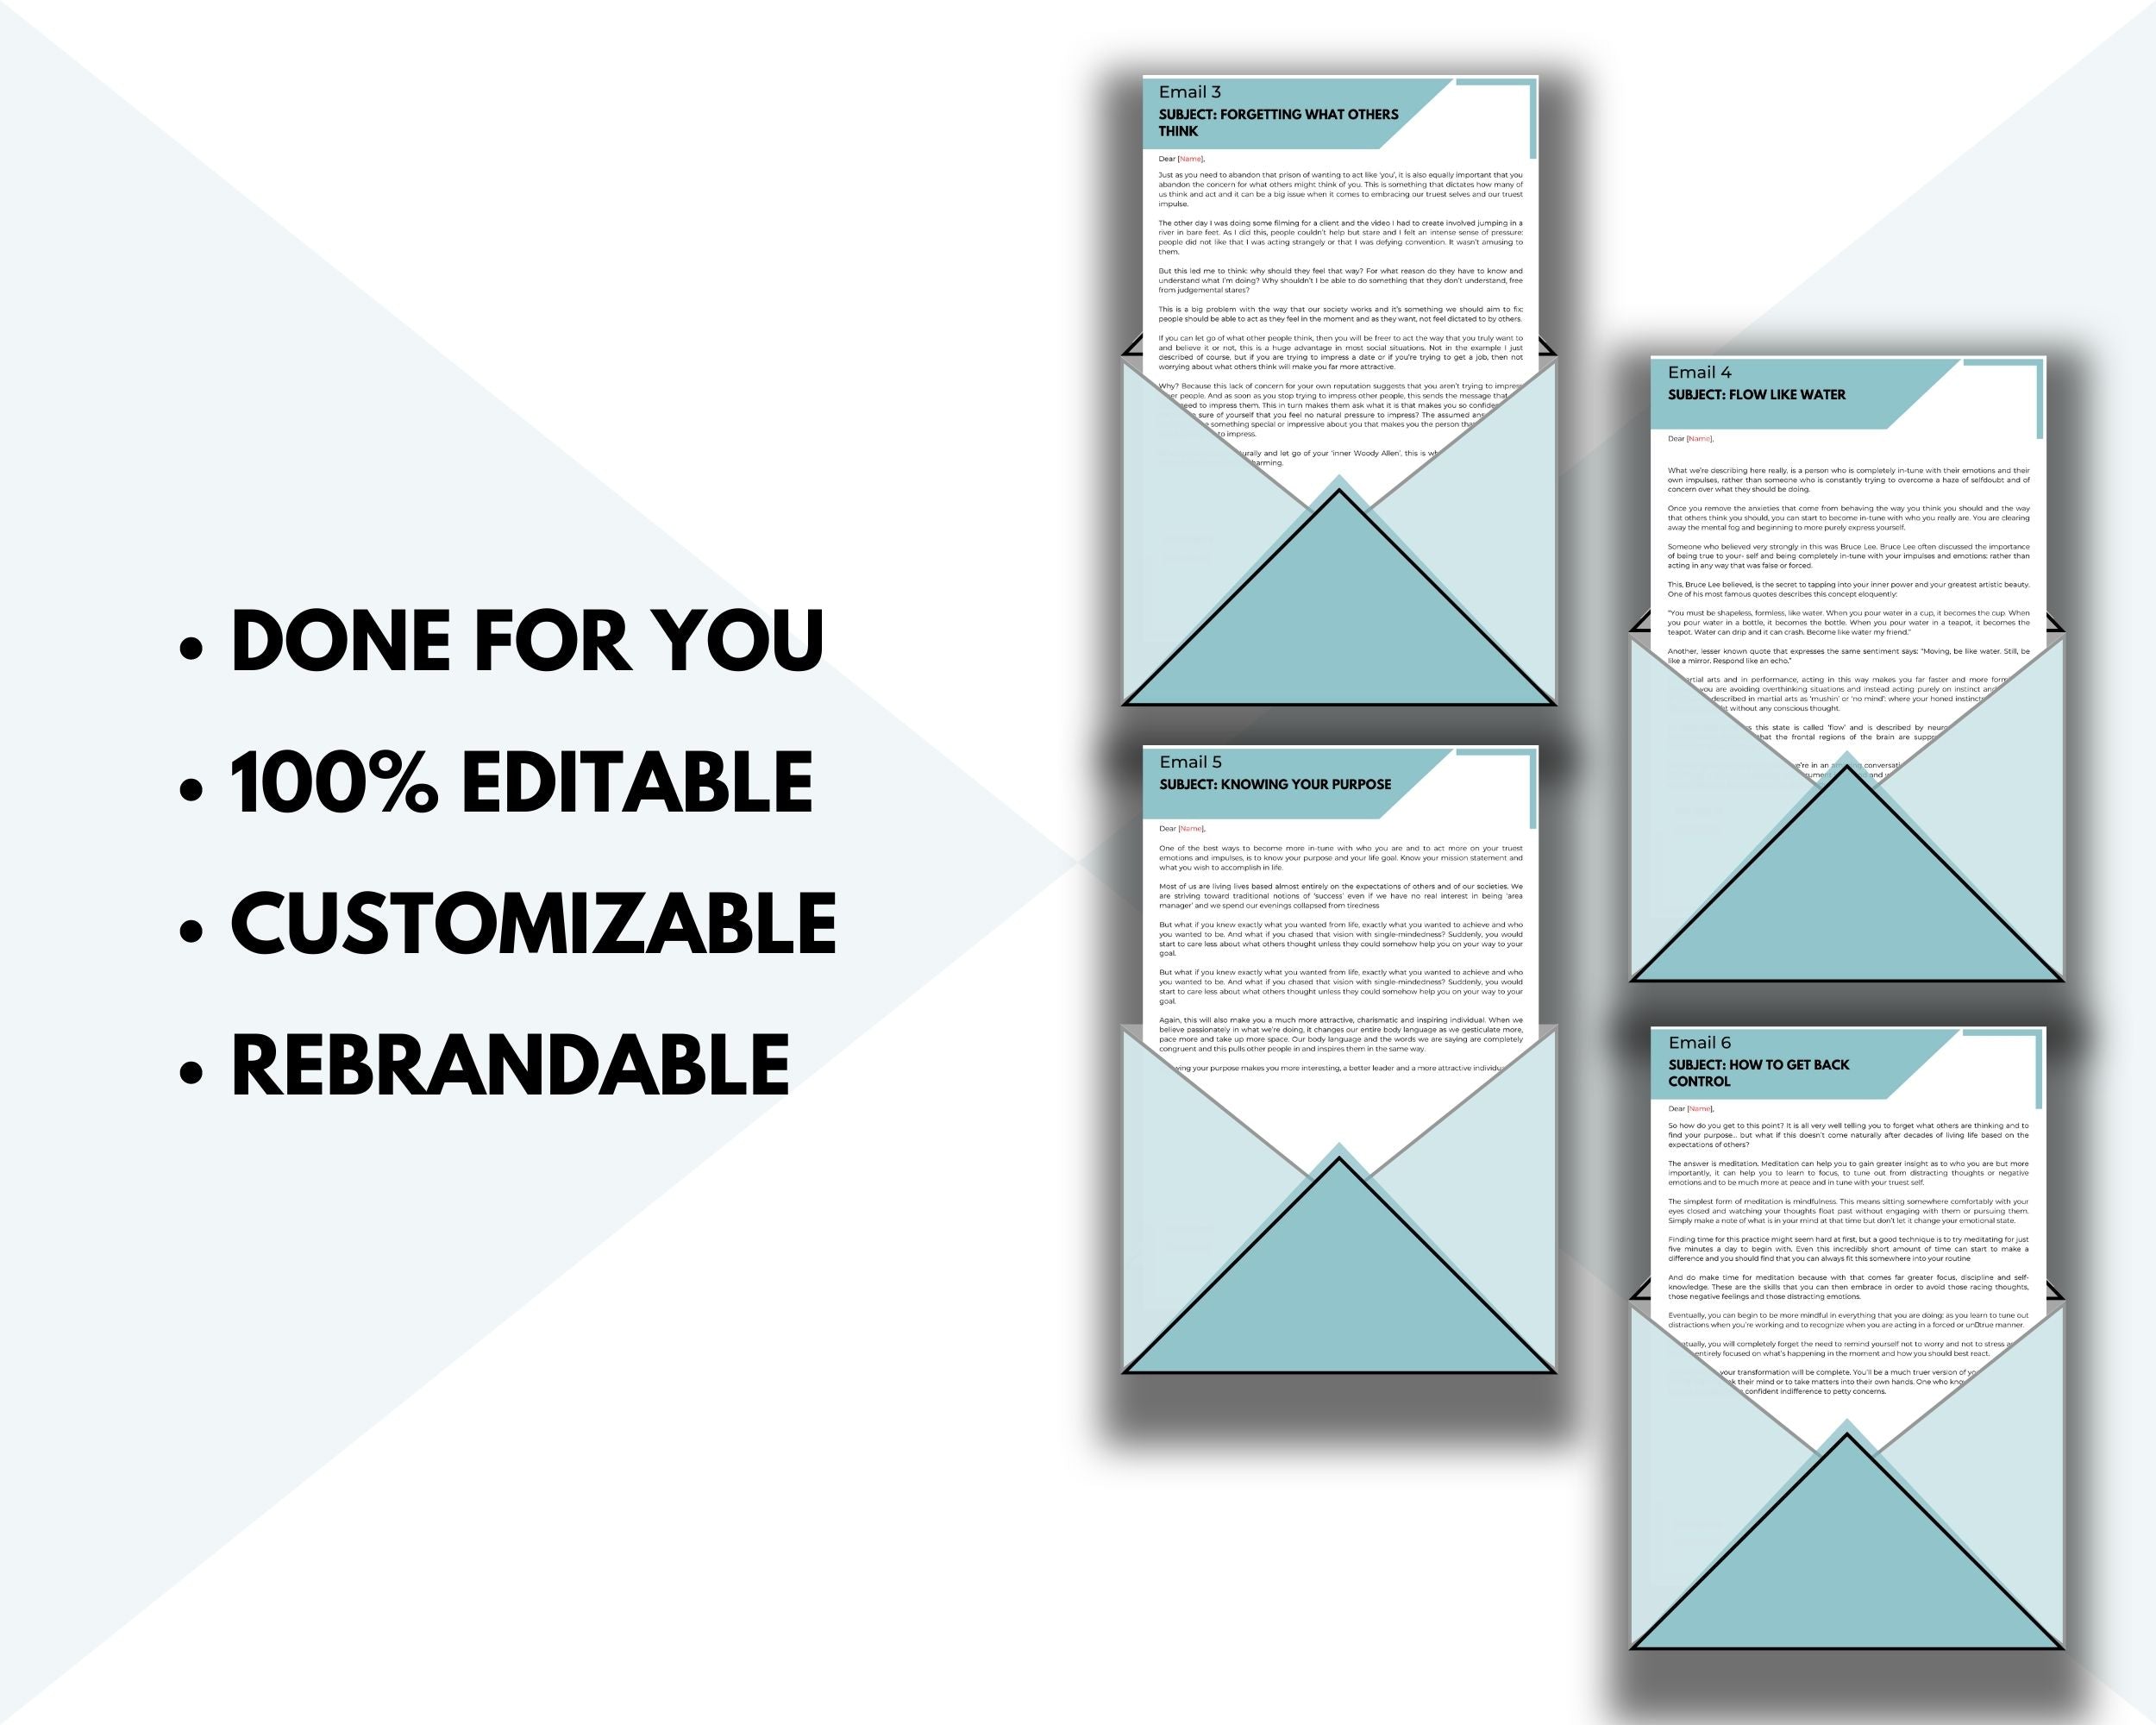 Editable 5 Step Personal Transformation Guide | Rebrandable Done-for-You eCourse